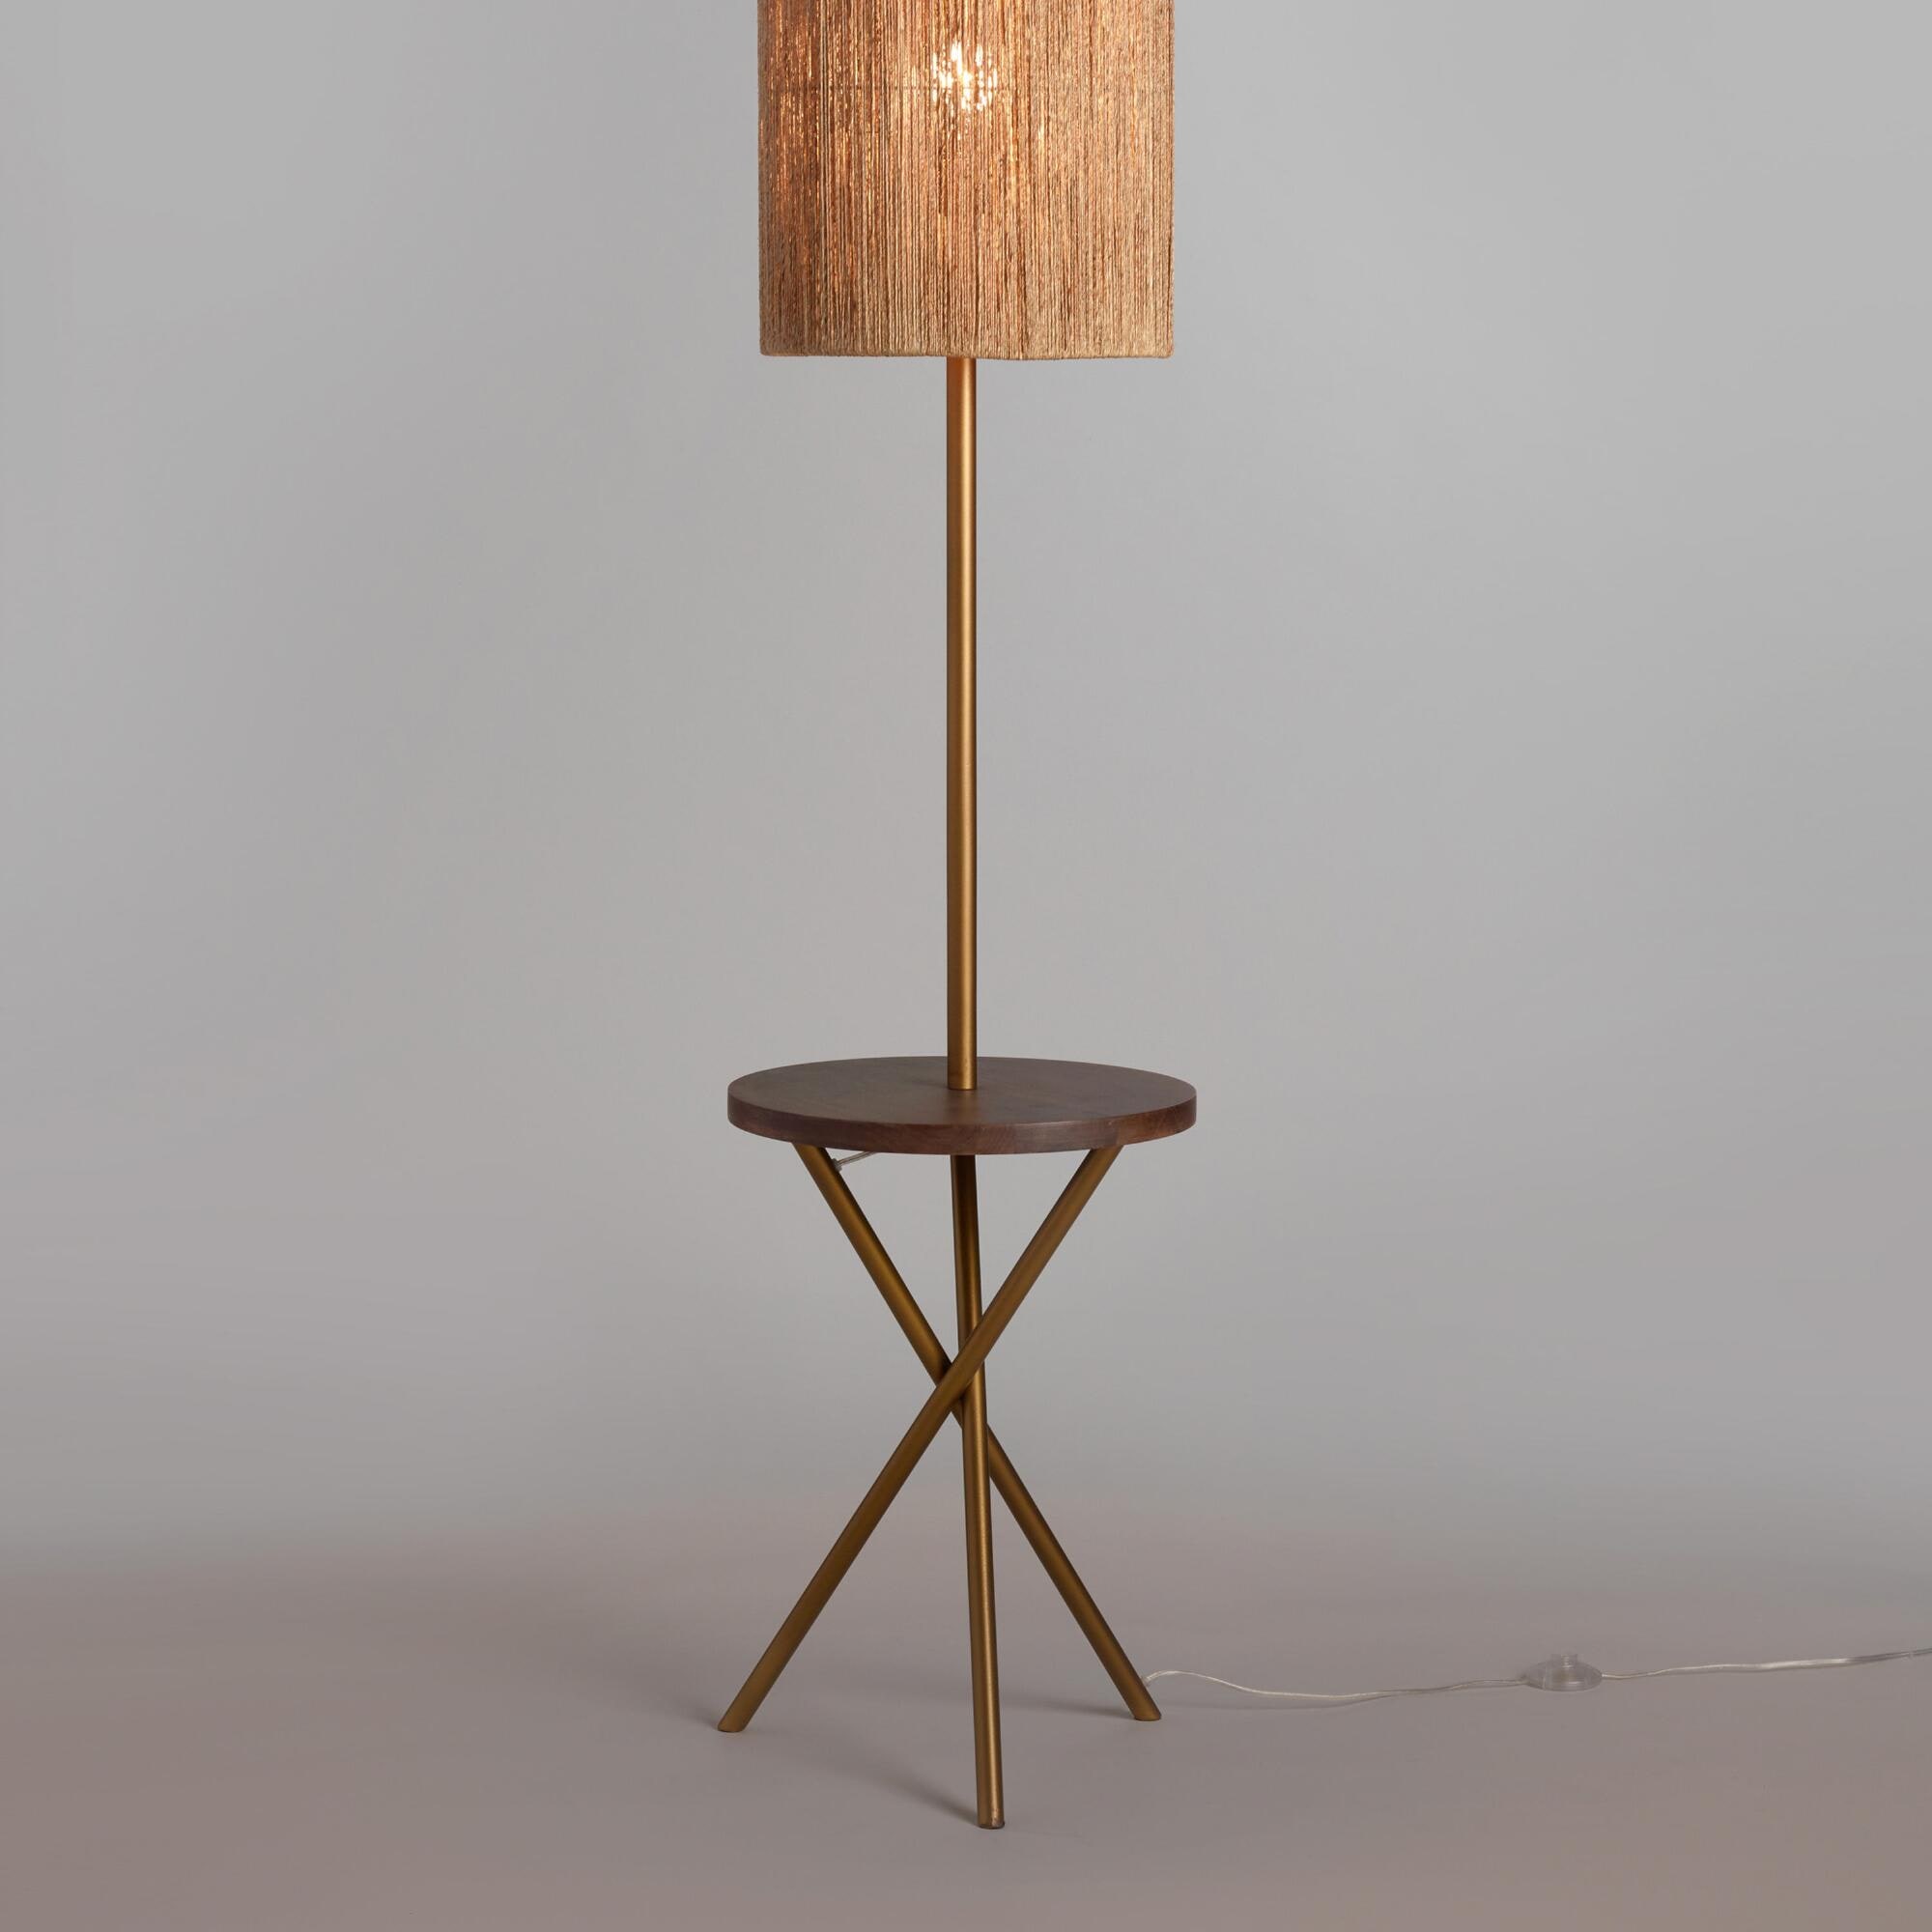 Floor lamps with tables